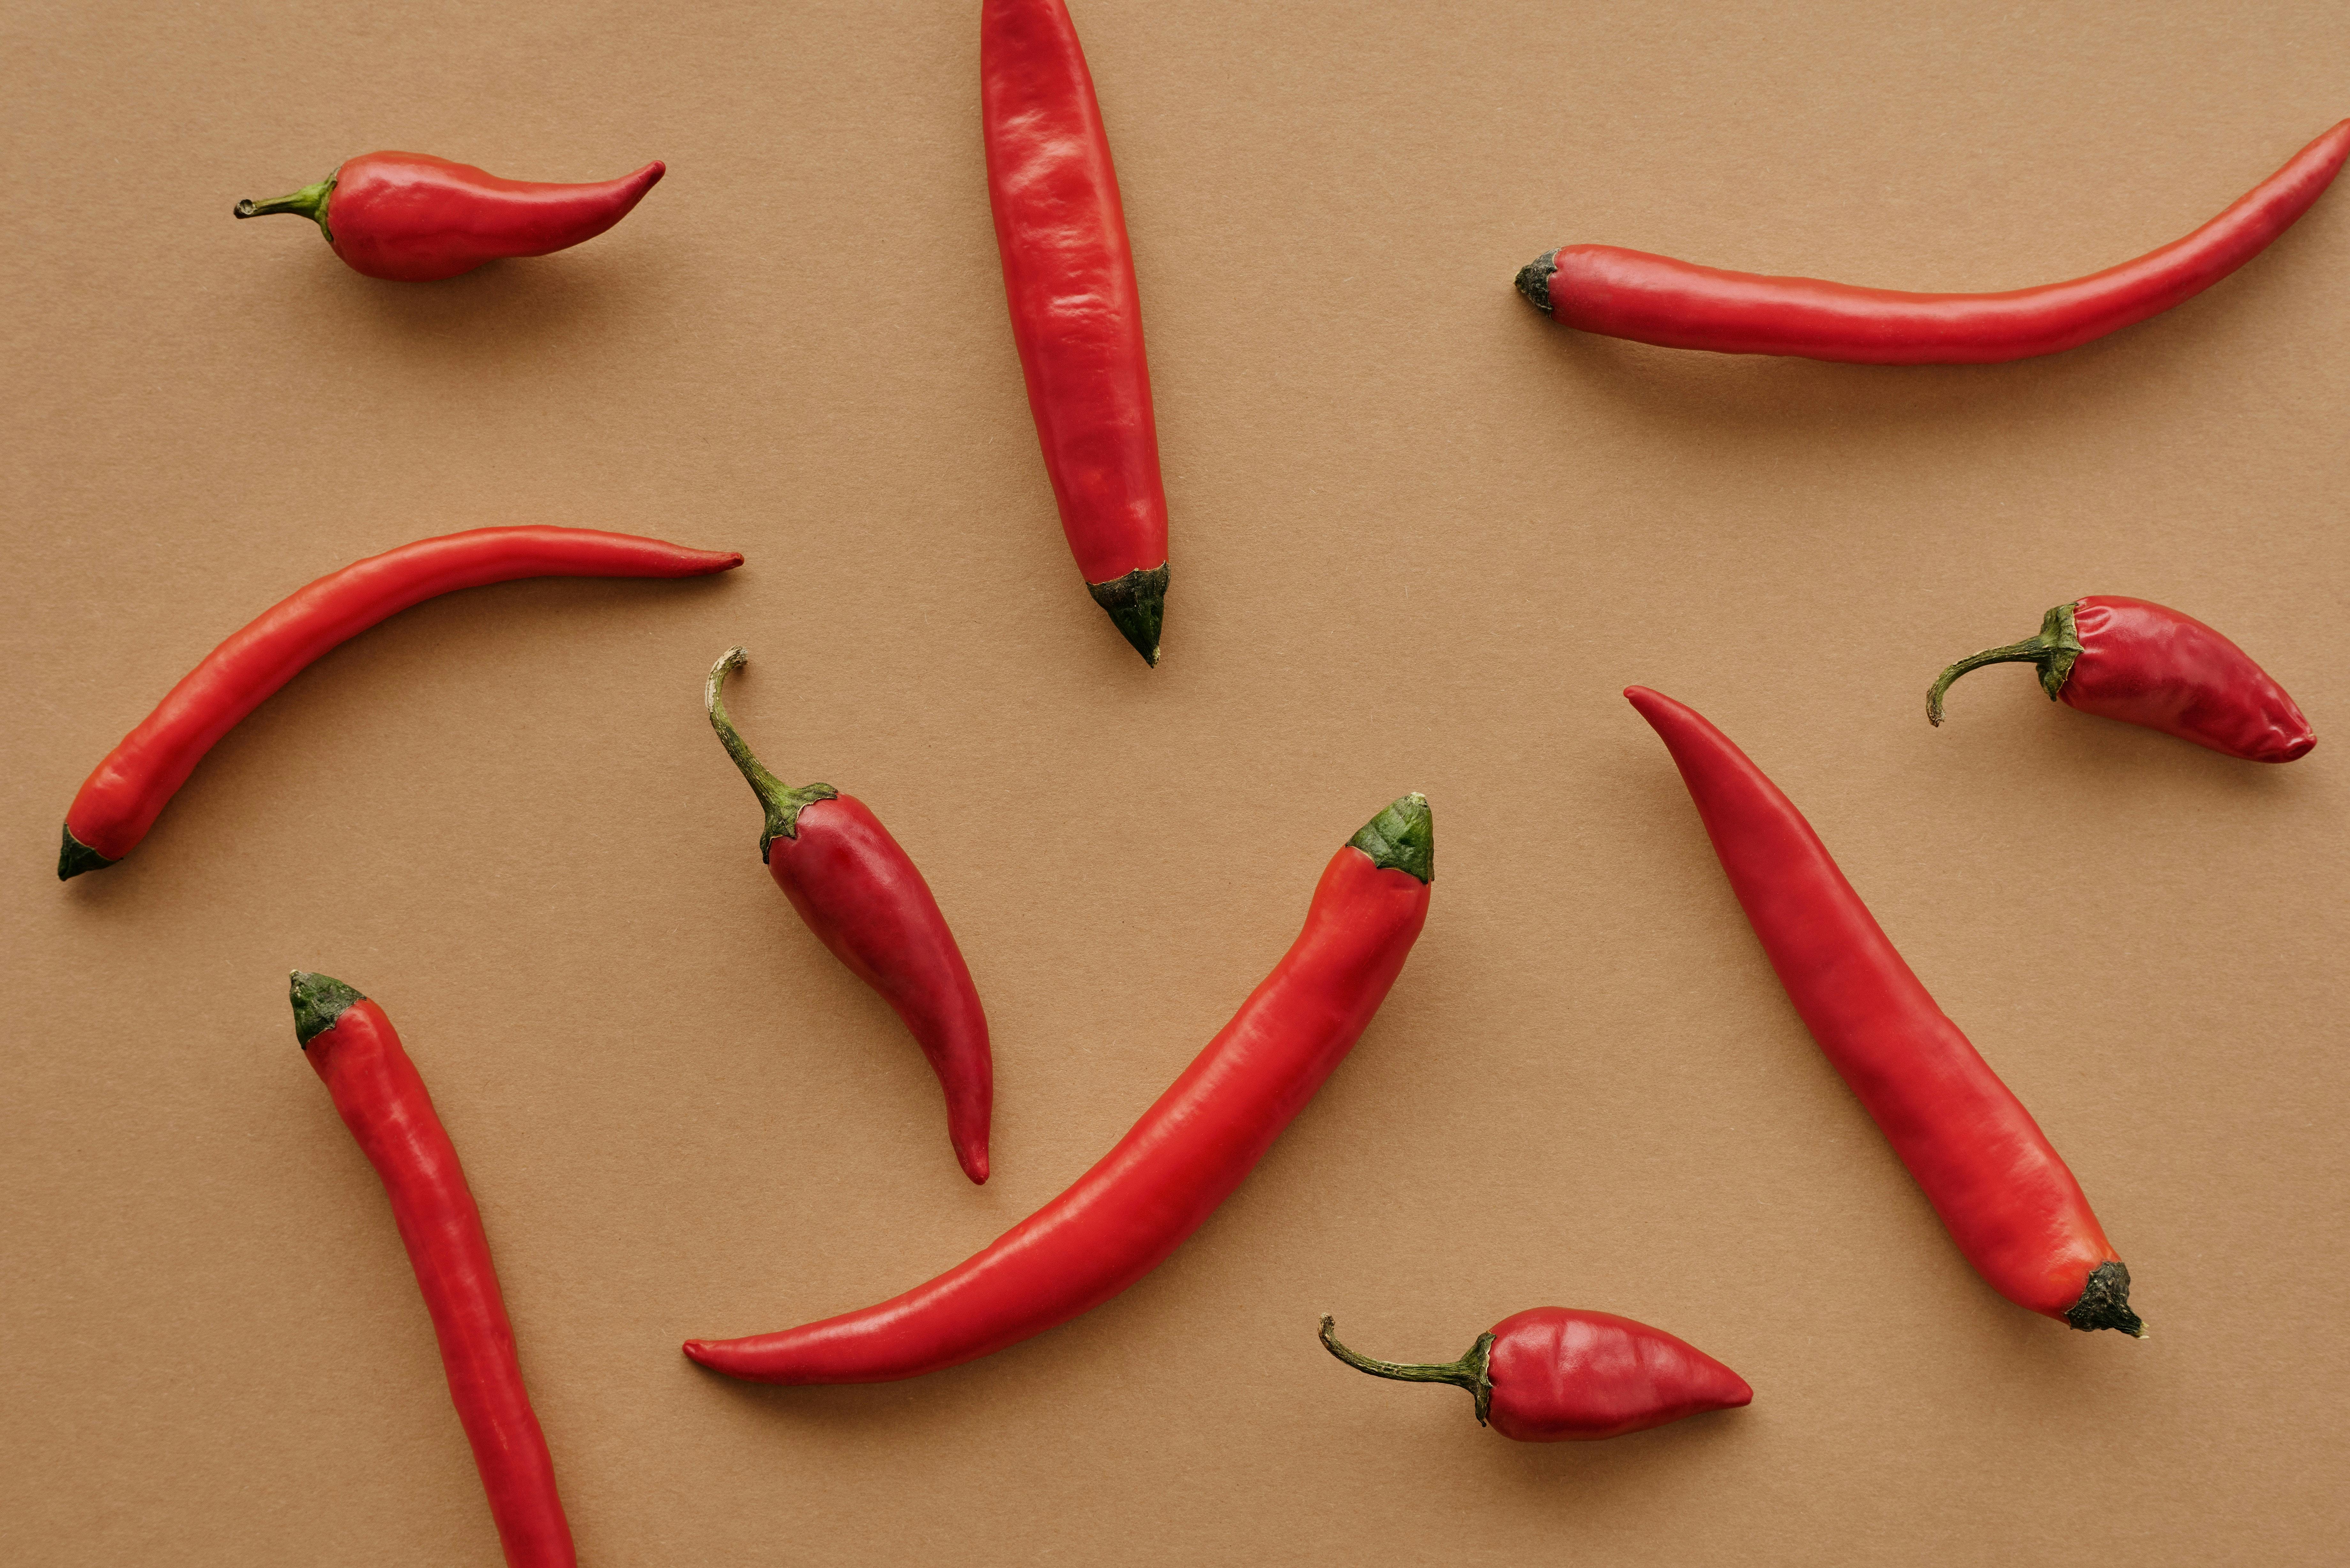 Red chilli peppers scattered on neutral background